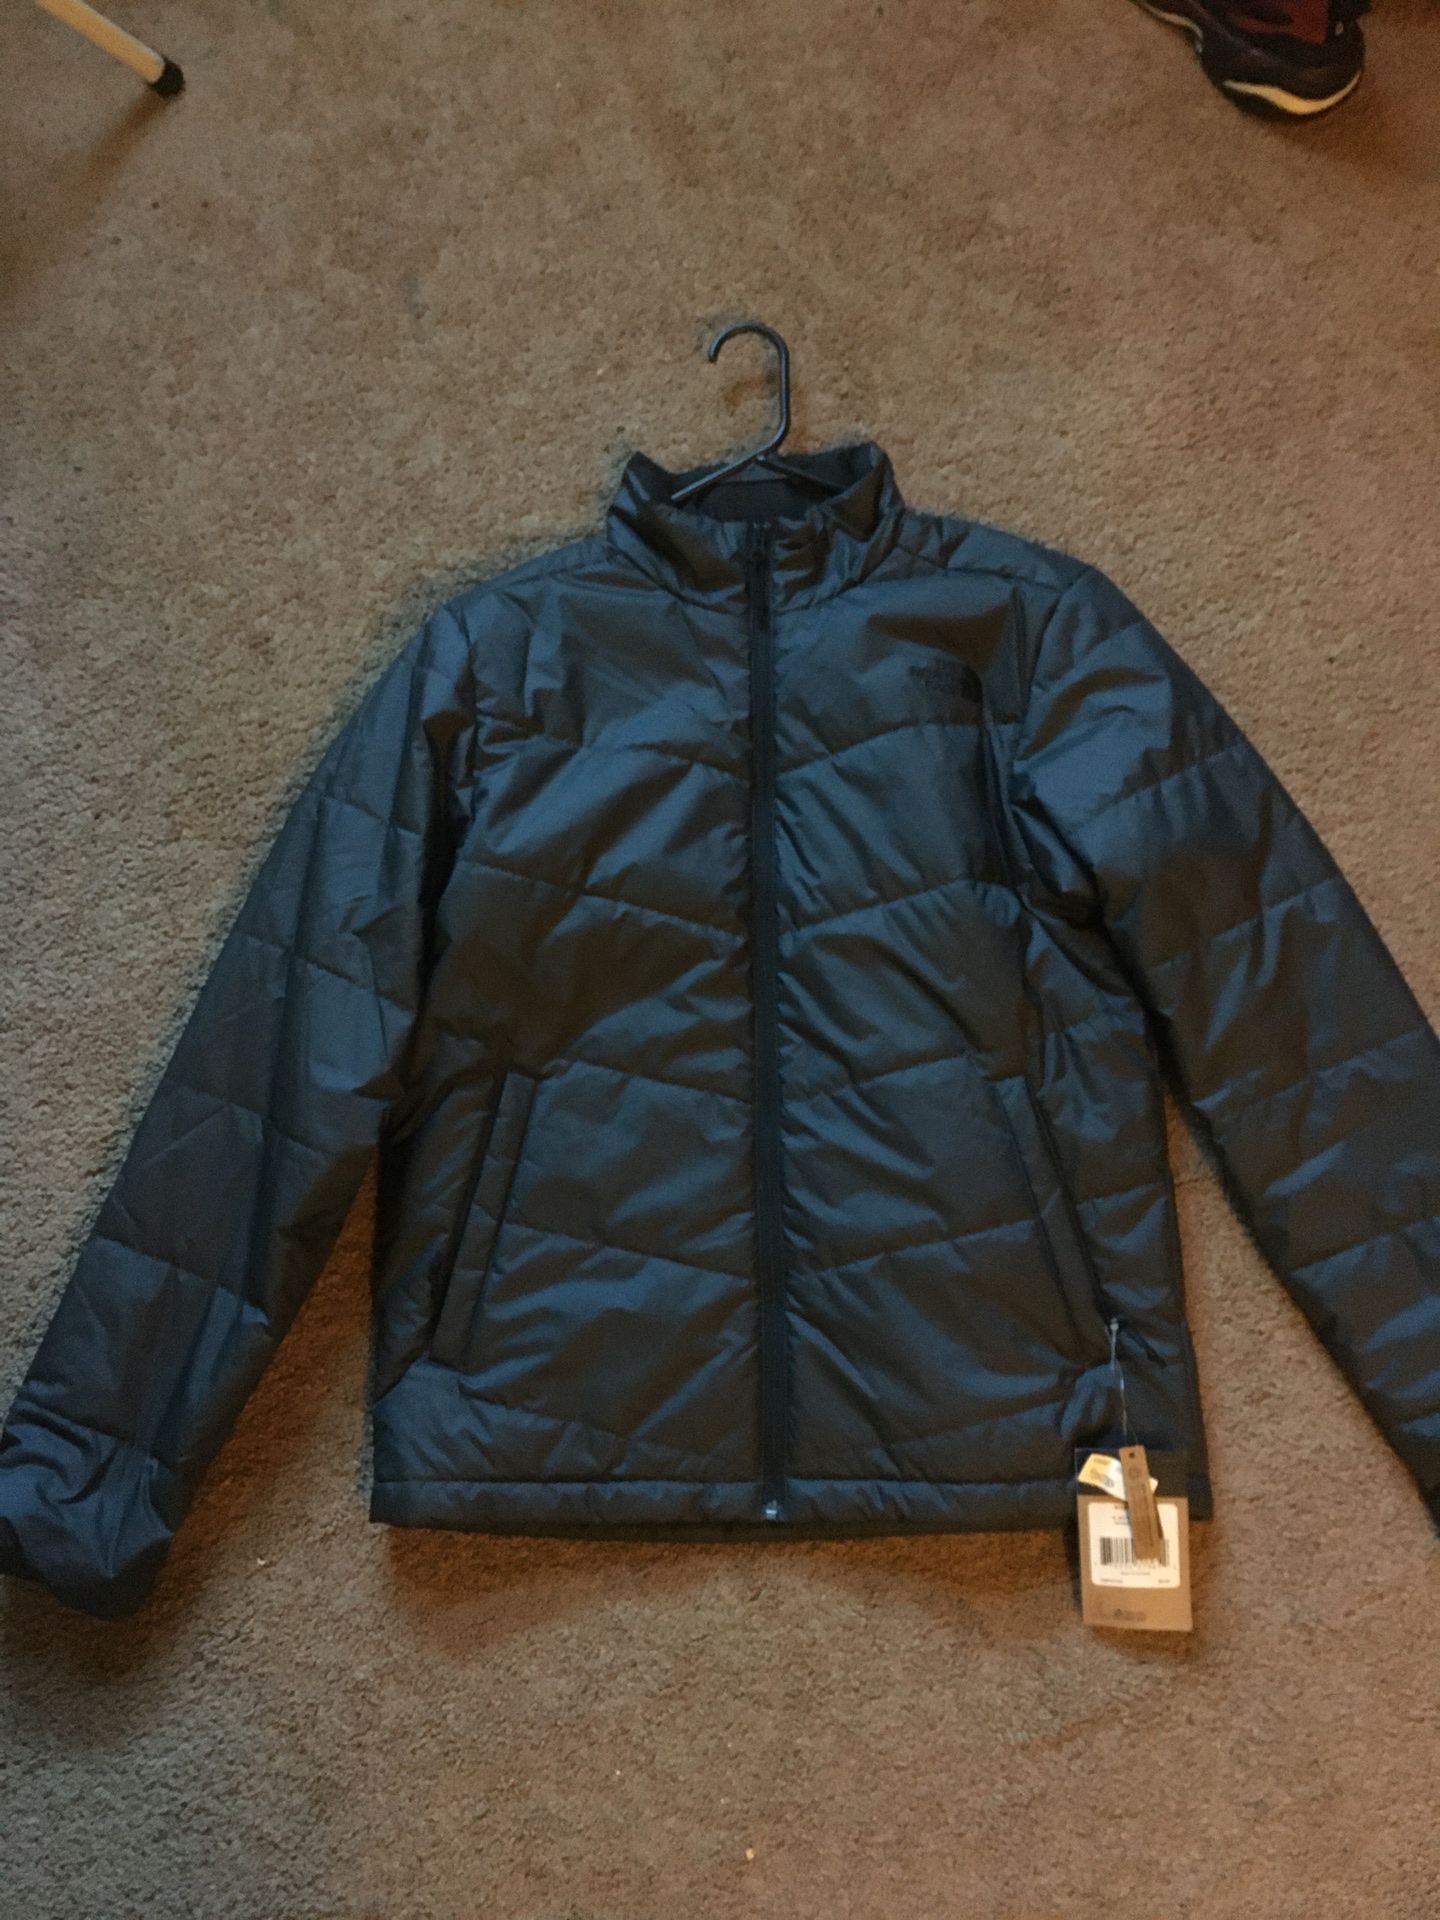 Brand new north face